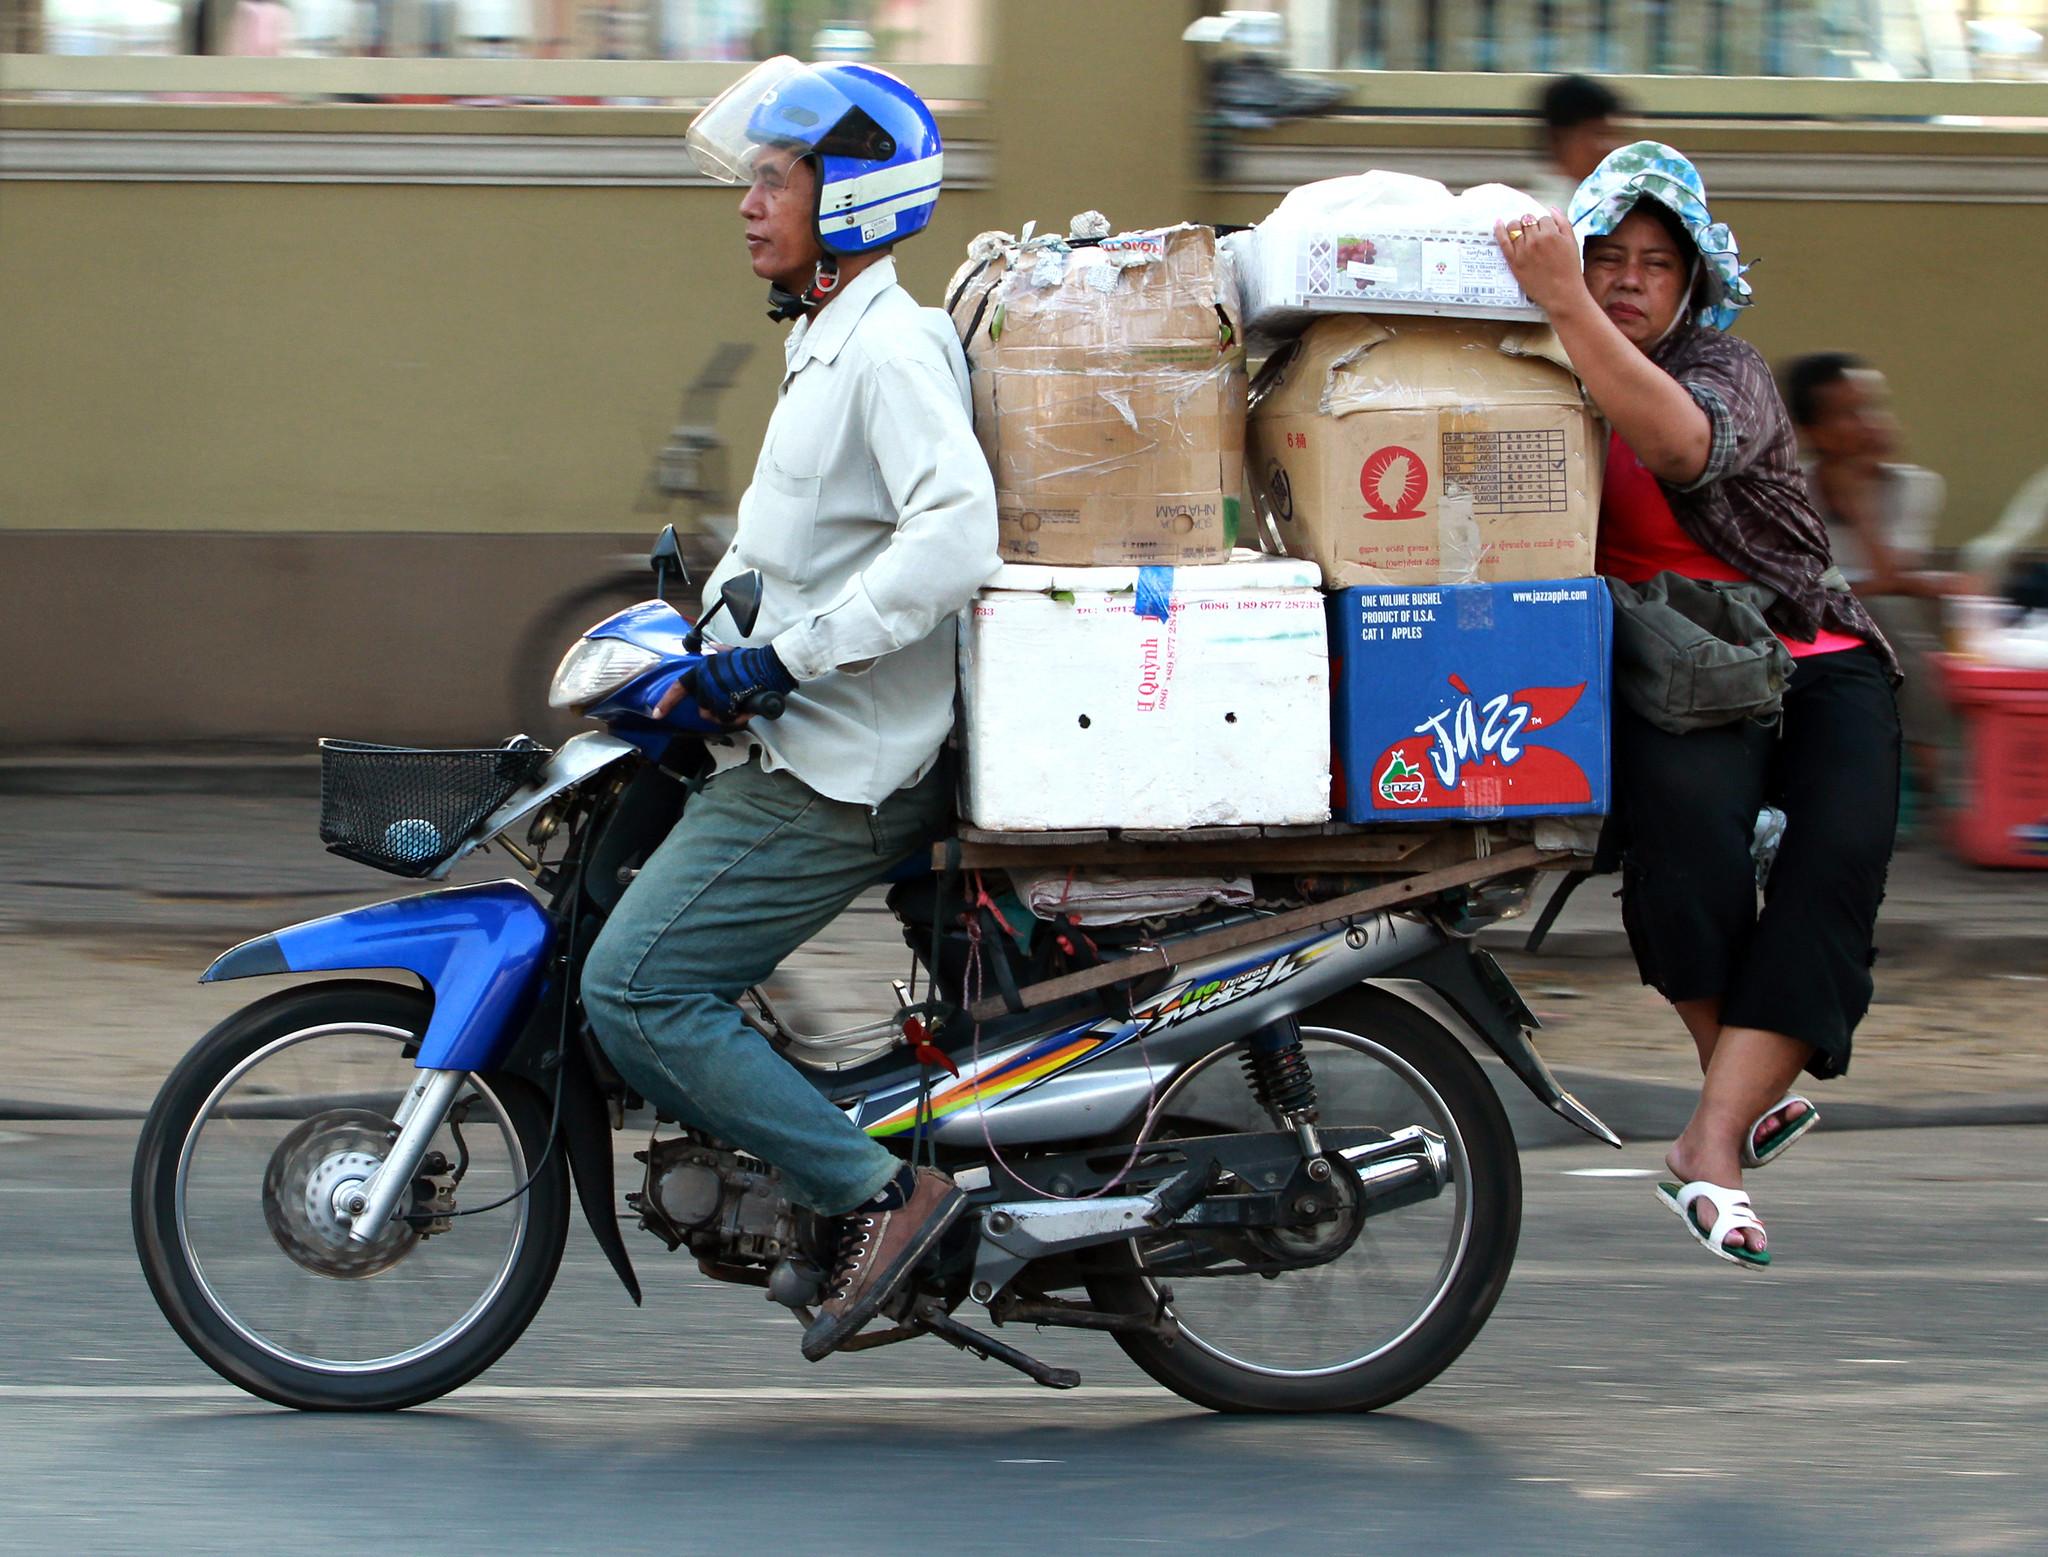 A motorcycle 'taxi' driver transports a trader and dry goods to the Phnom Penh market, Cambodia.